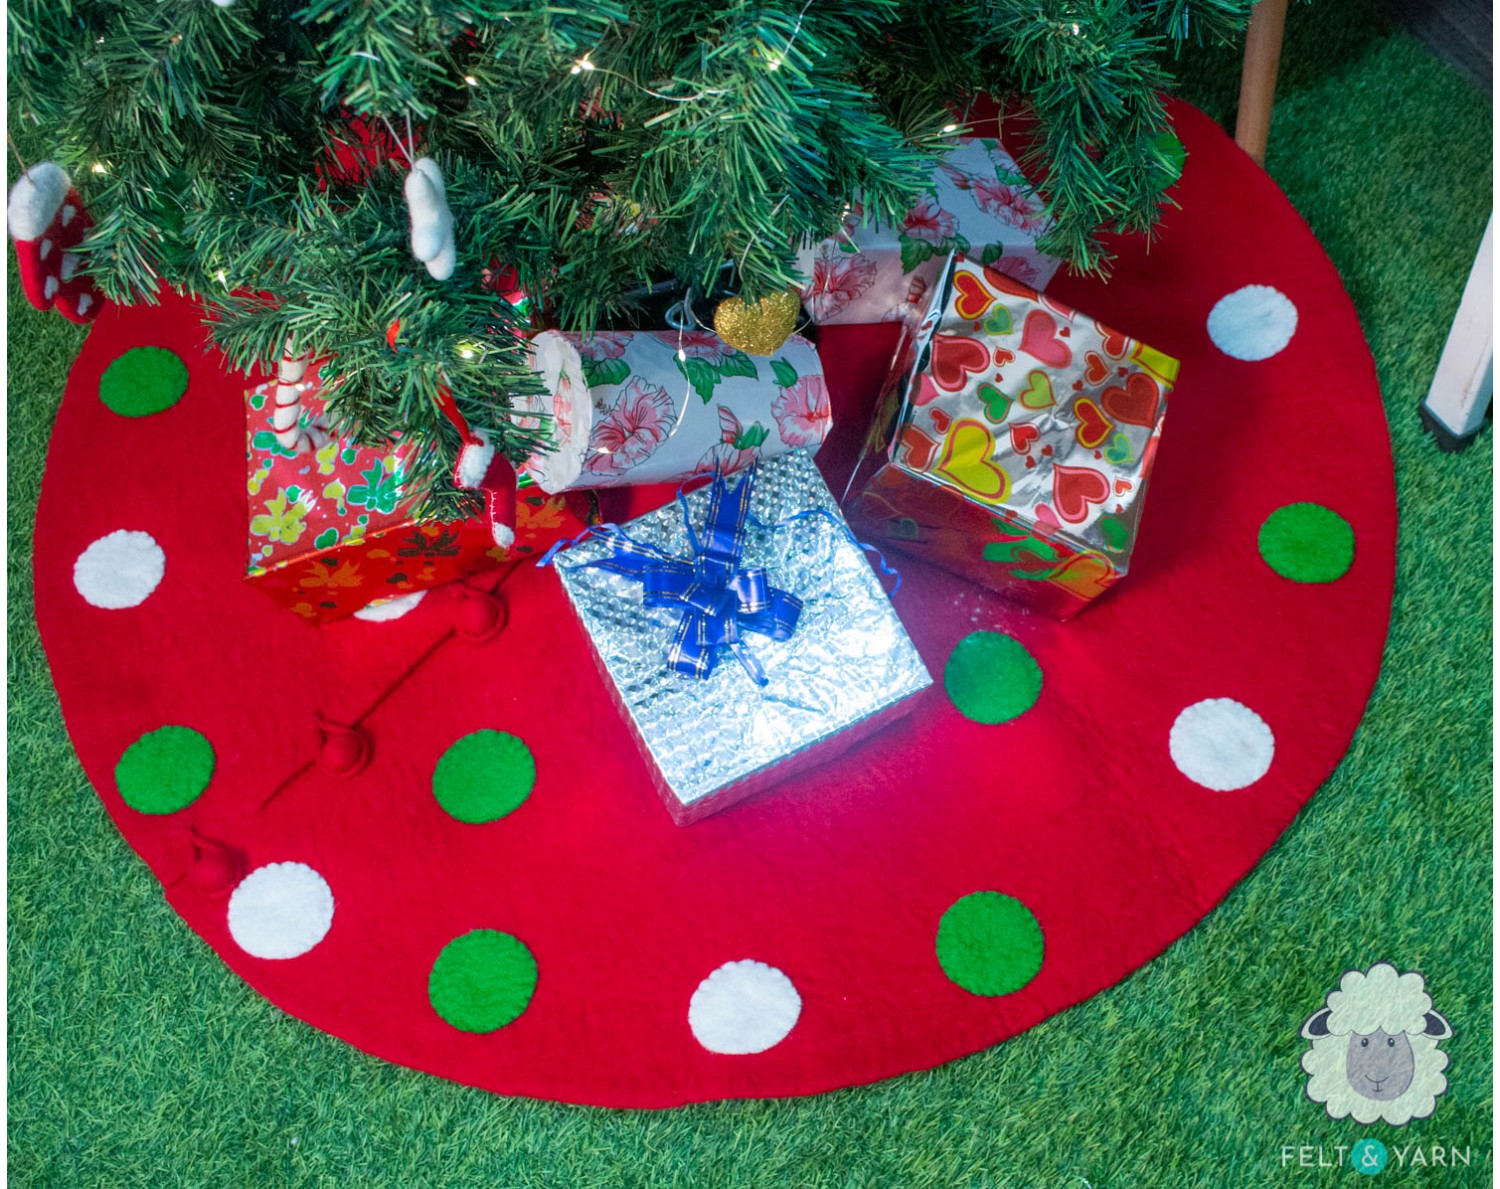 Red Tree Skirt with Polka Dots